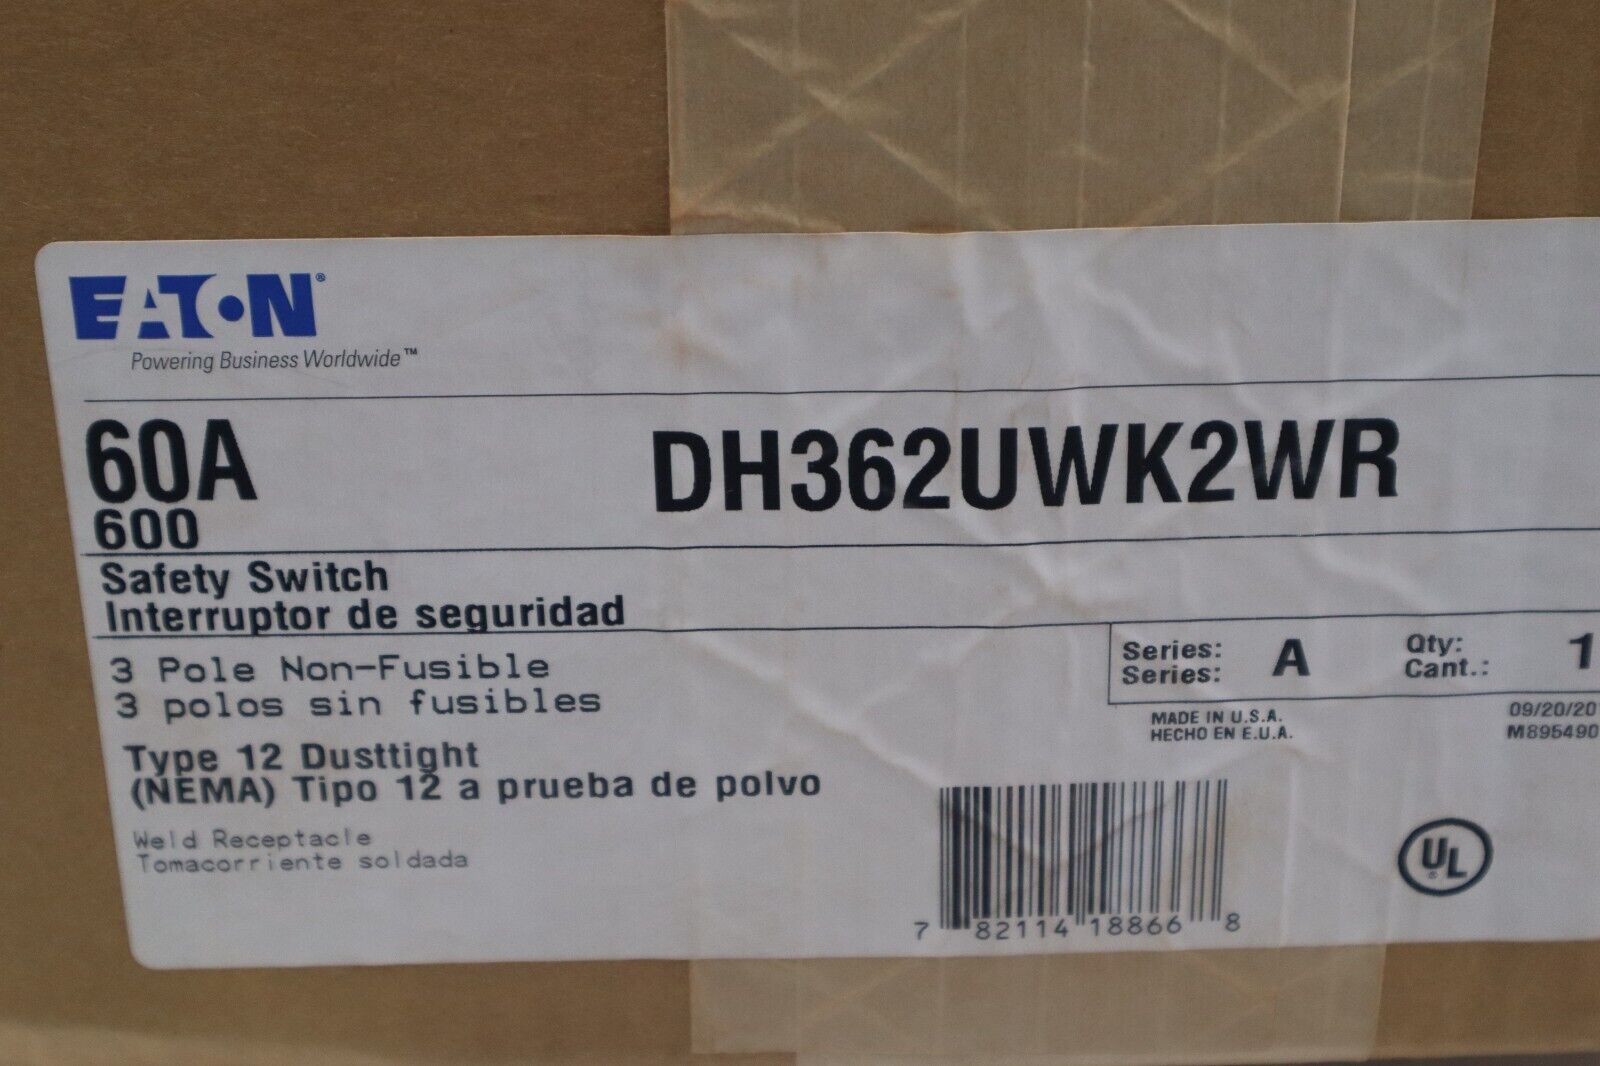 NEW Eaton DH362UWK2WR 60A/3P HD NON-FUSIBLE SAFETY SWITCH W/CROUSE STOCK W-73